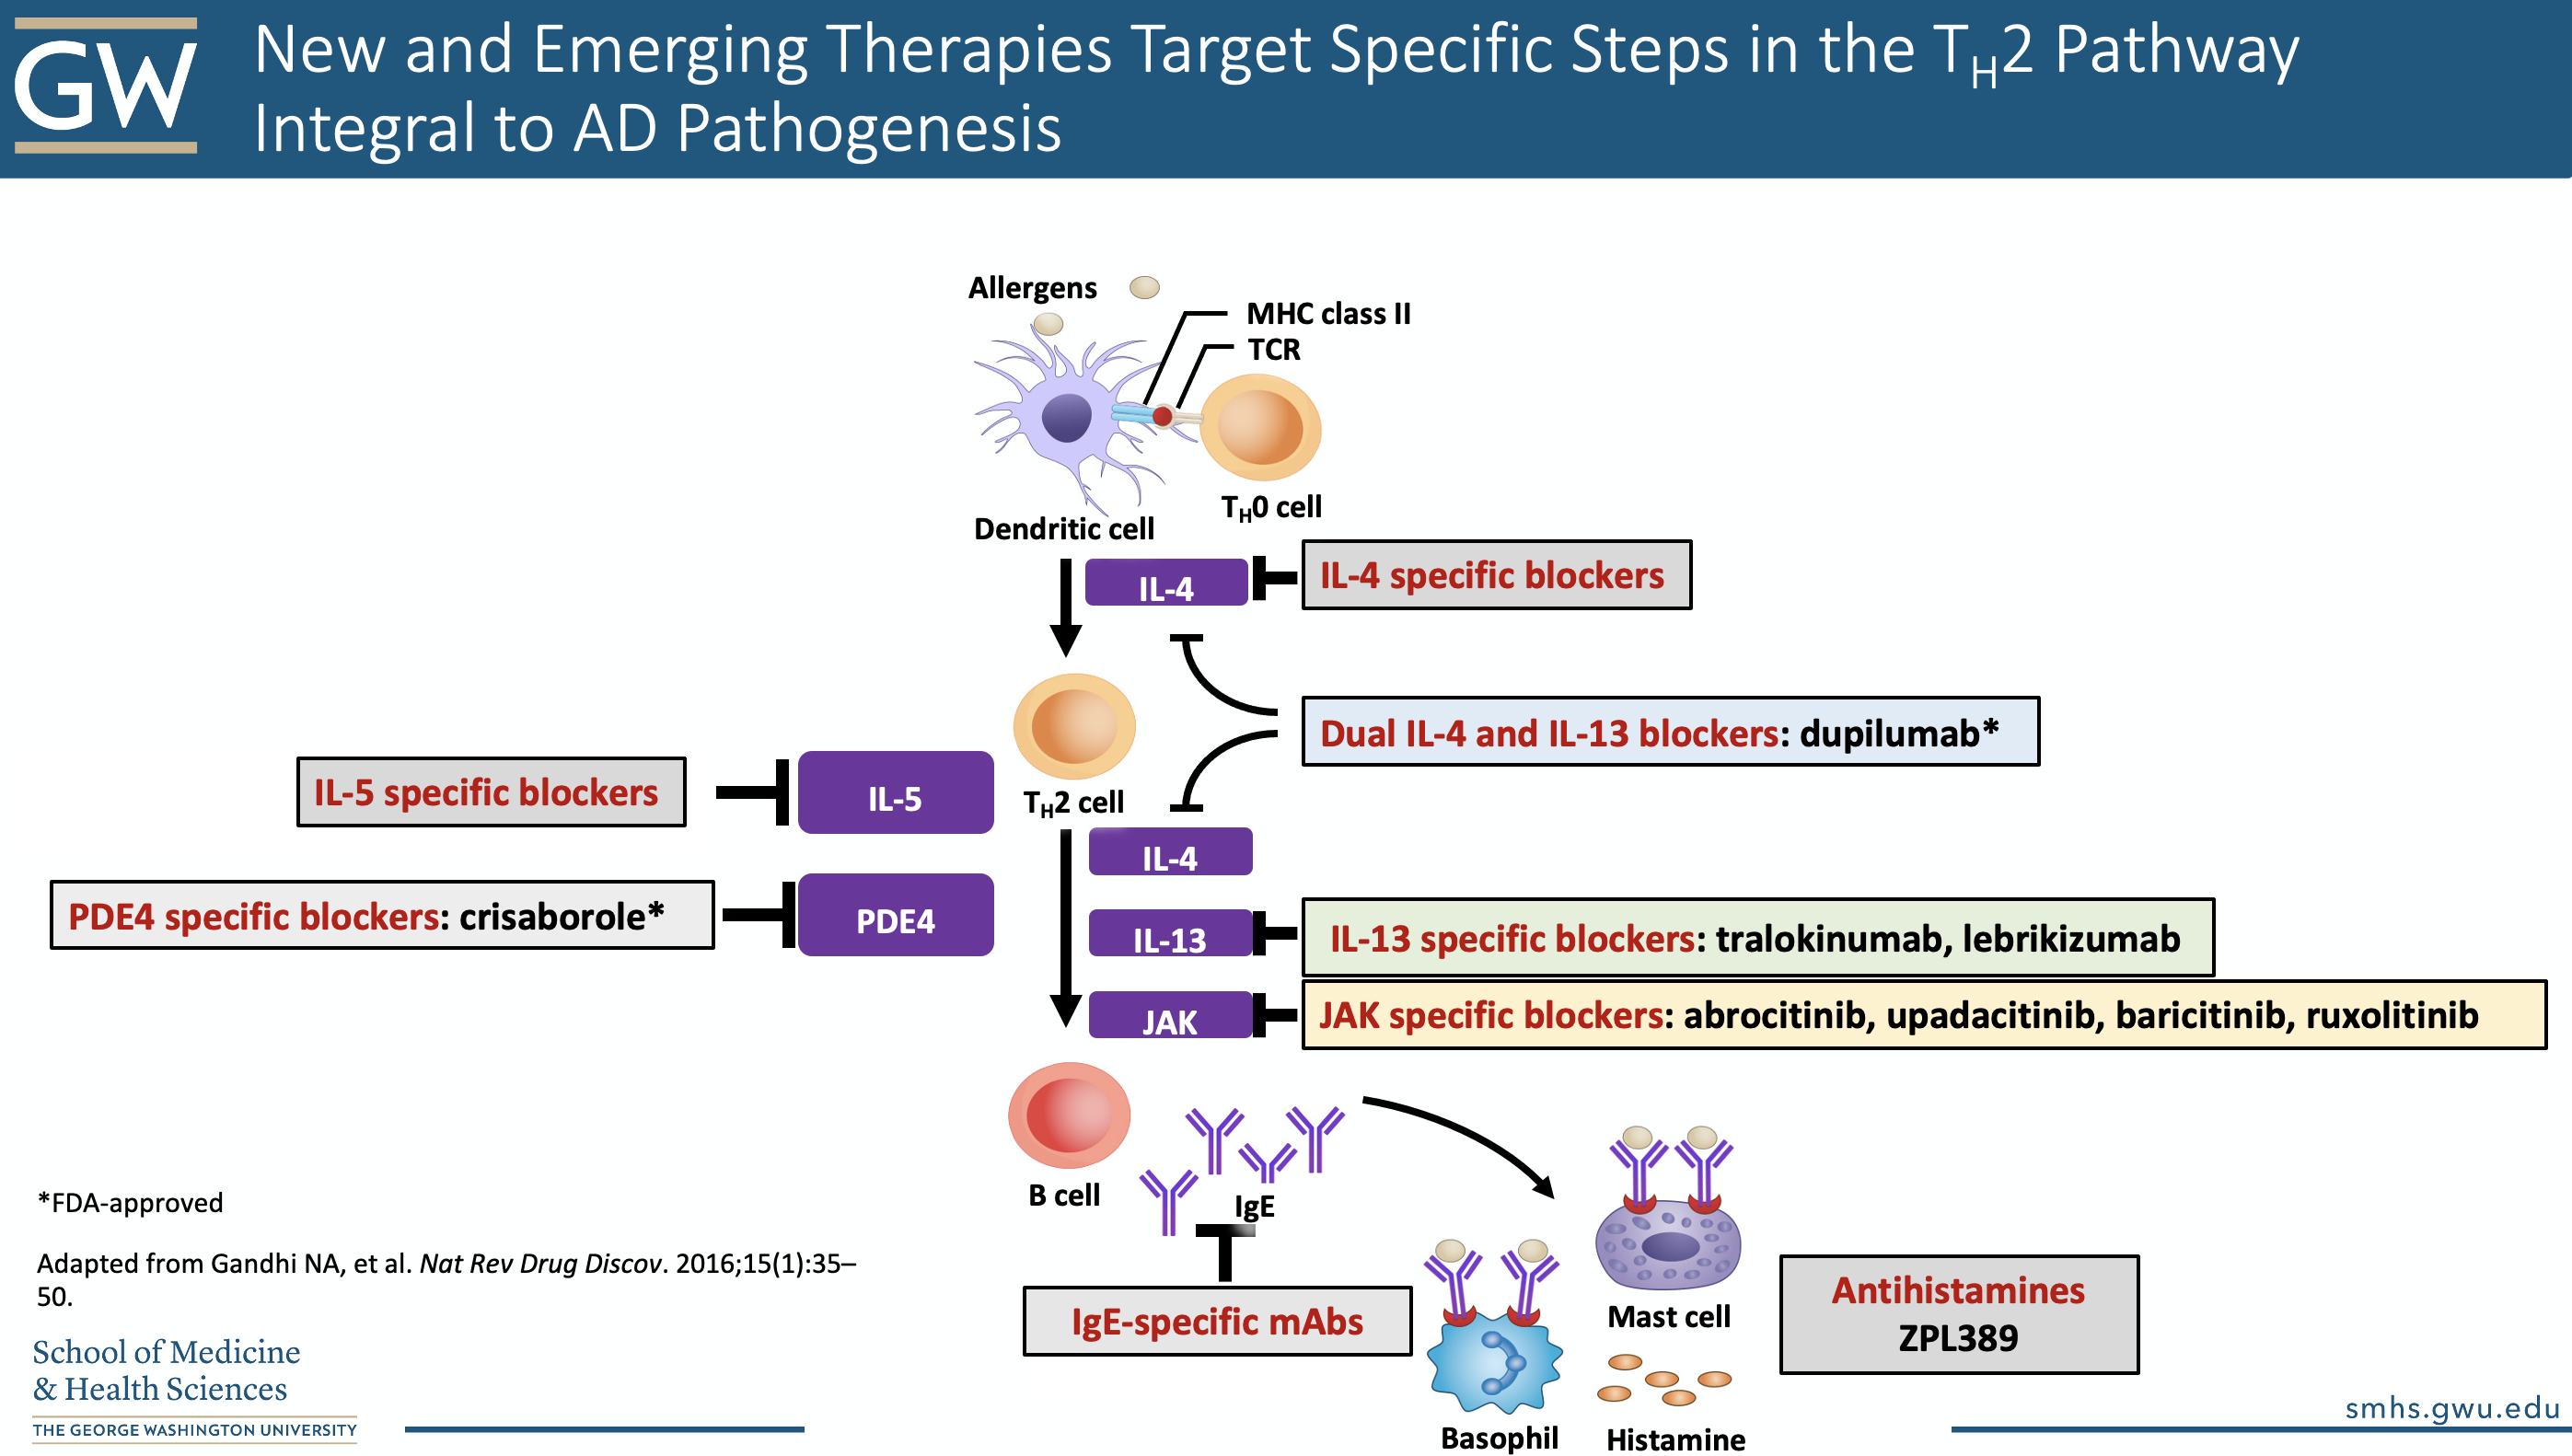 New and Emerging Therapies Target Specific Steps in the TH2 Pathway Integral to AD Pathogenesis